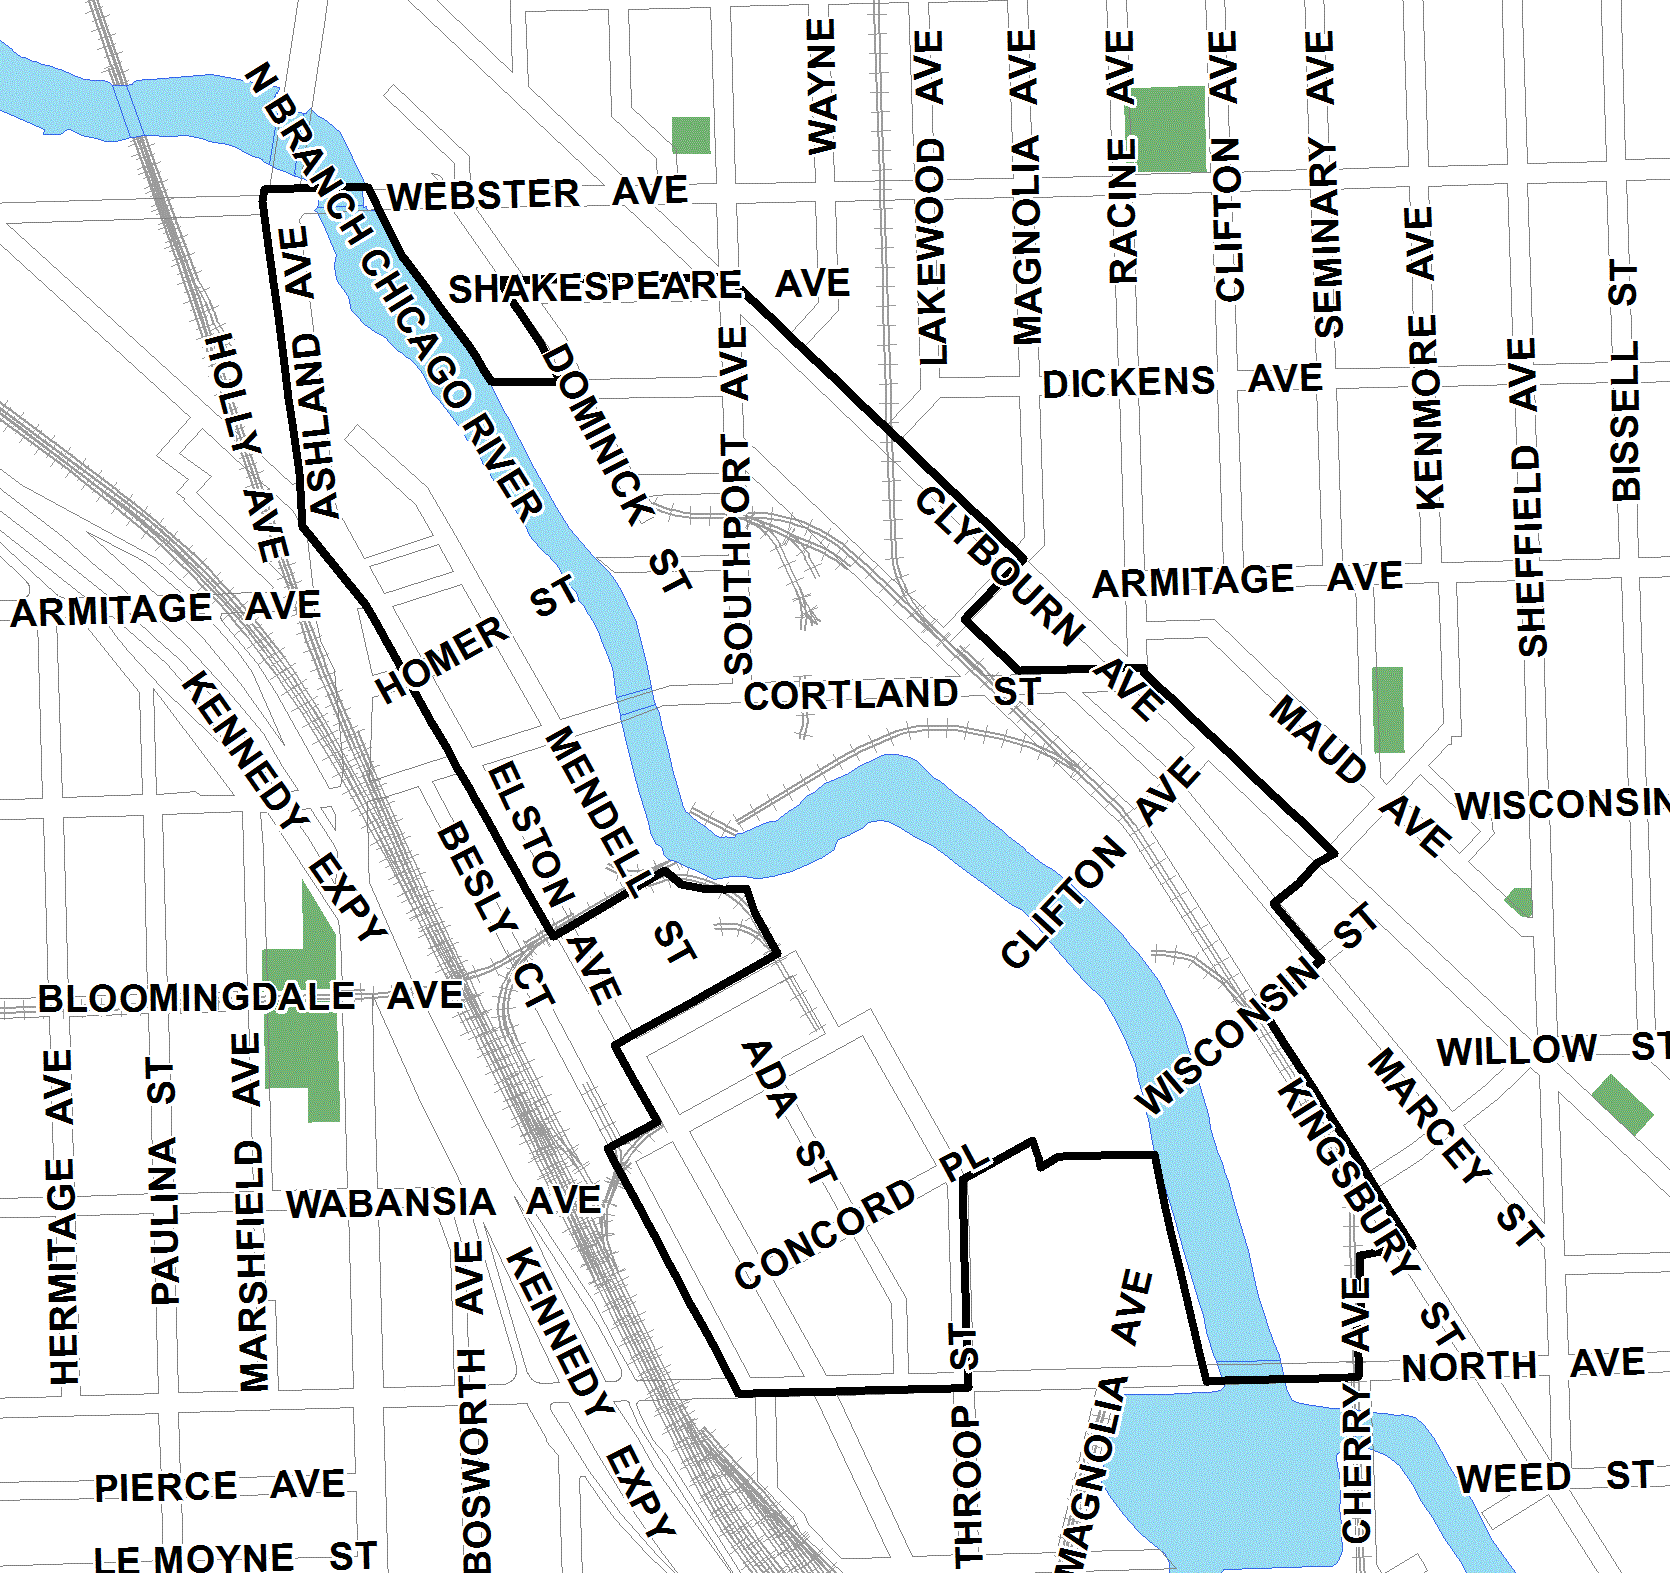 Cortland/Chicago River TIF roughly bounded by Webster Avenue on the north; Clybourn Avenue on the east; North Avenue on the south; and Elston Avenue and Besly Court on the west.